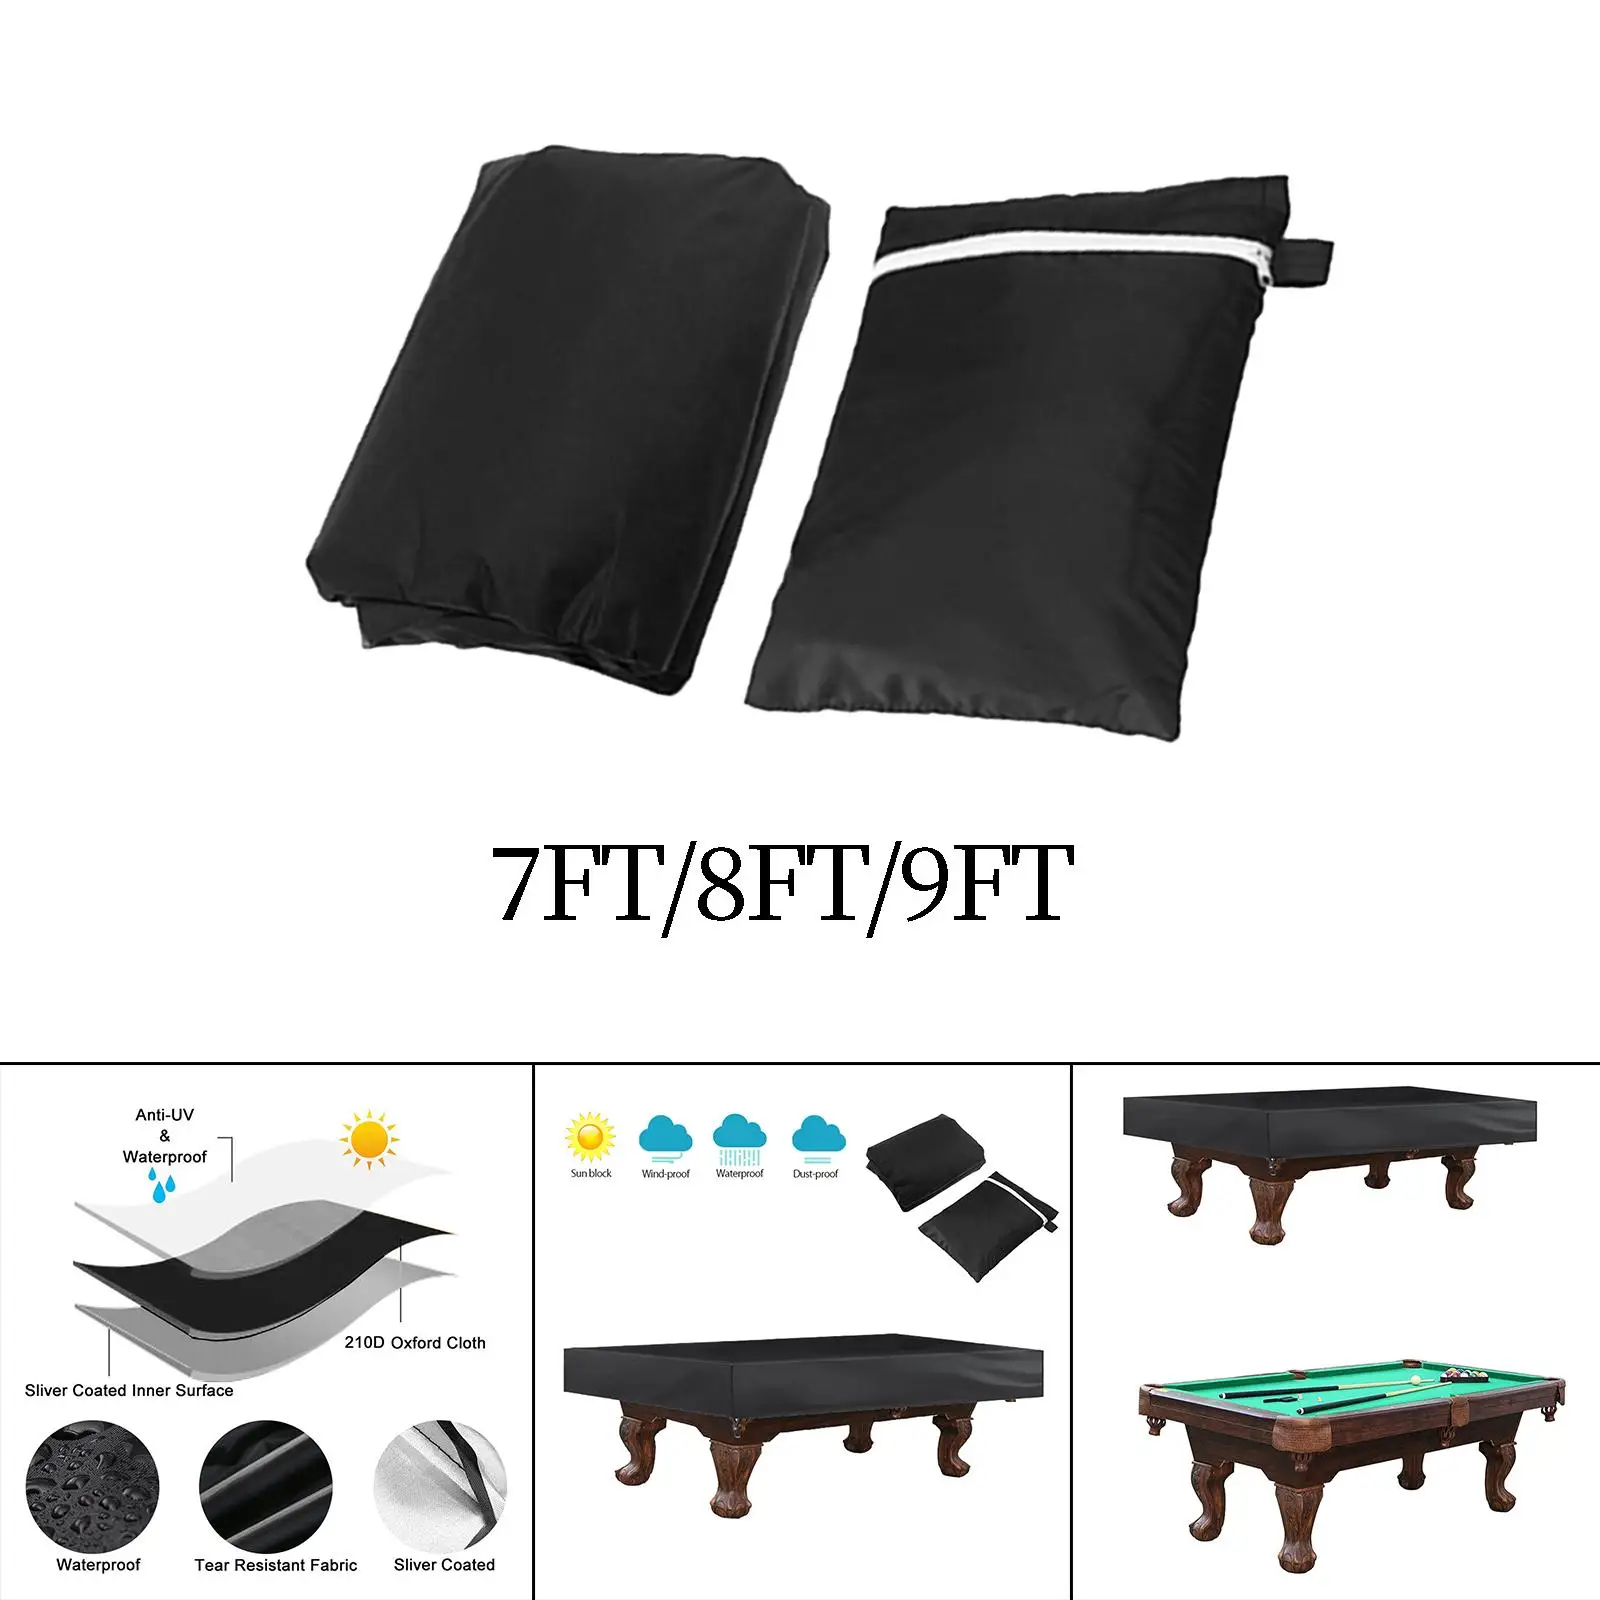 Billiard Pool Table Cover Waterproof Durable with Drawstring Windproof Table Protector for Indoor Outdoor Table Tennis Table